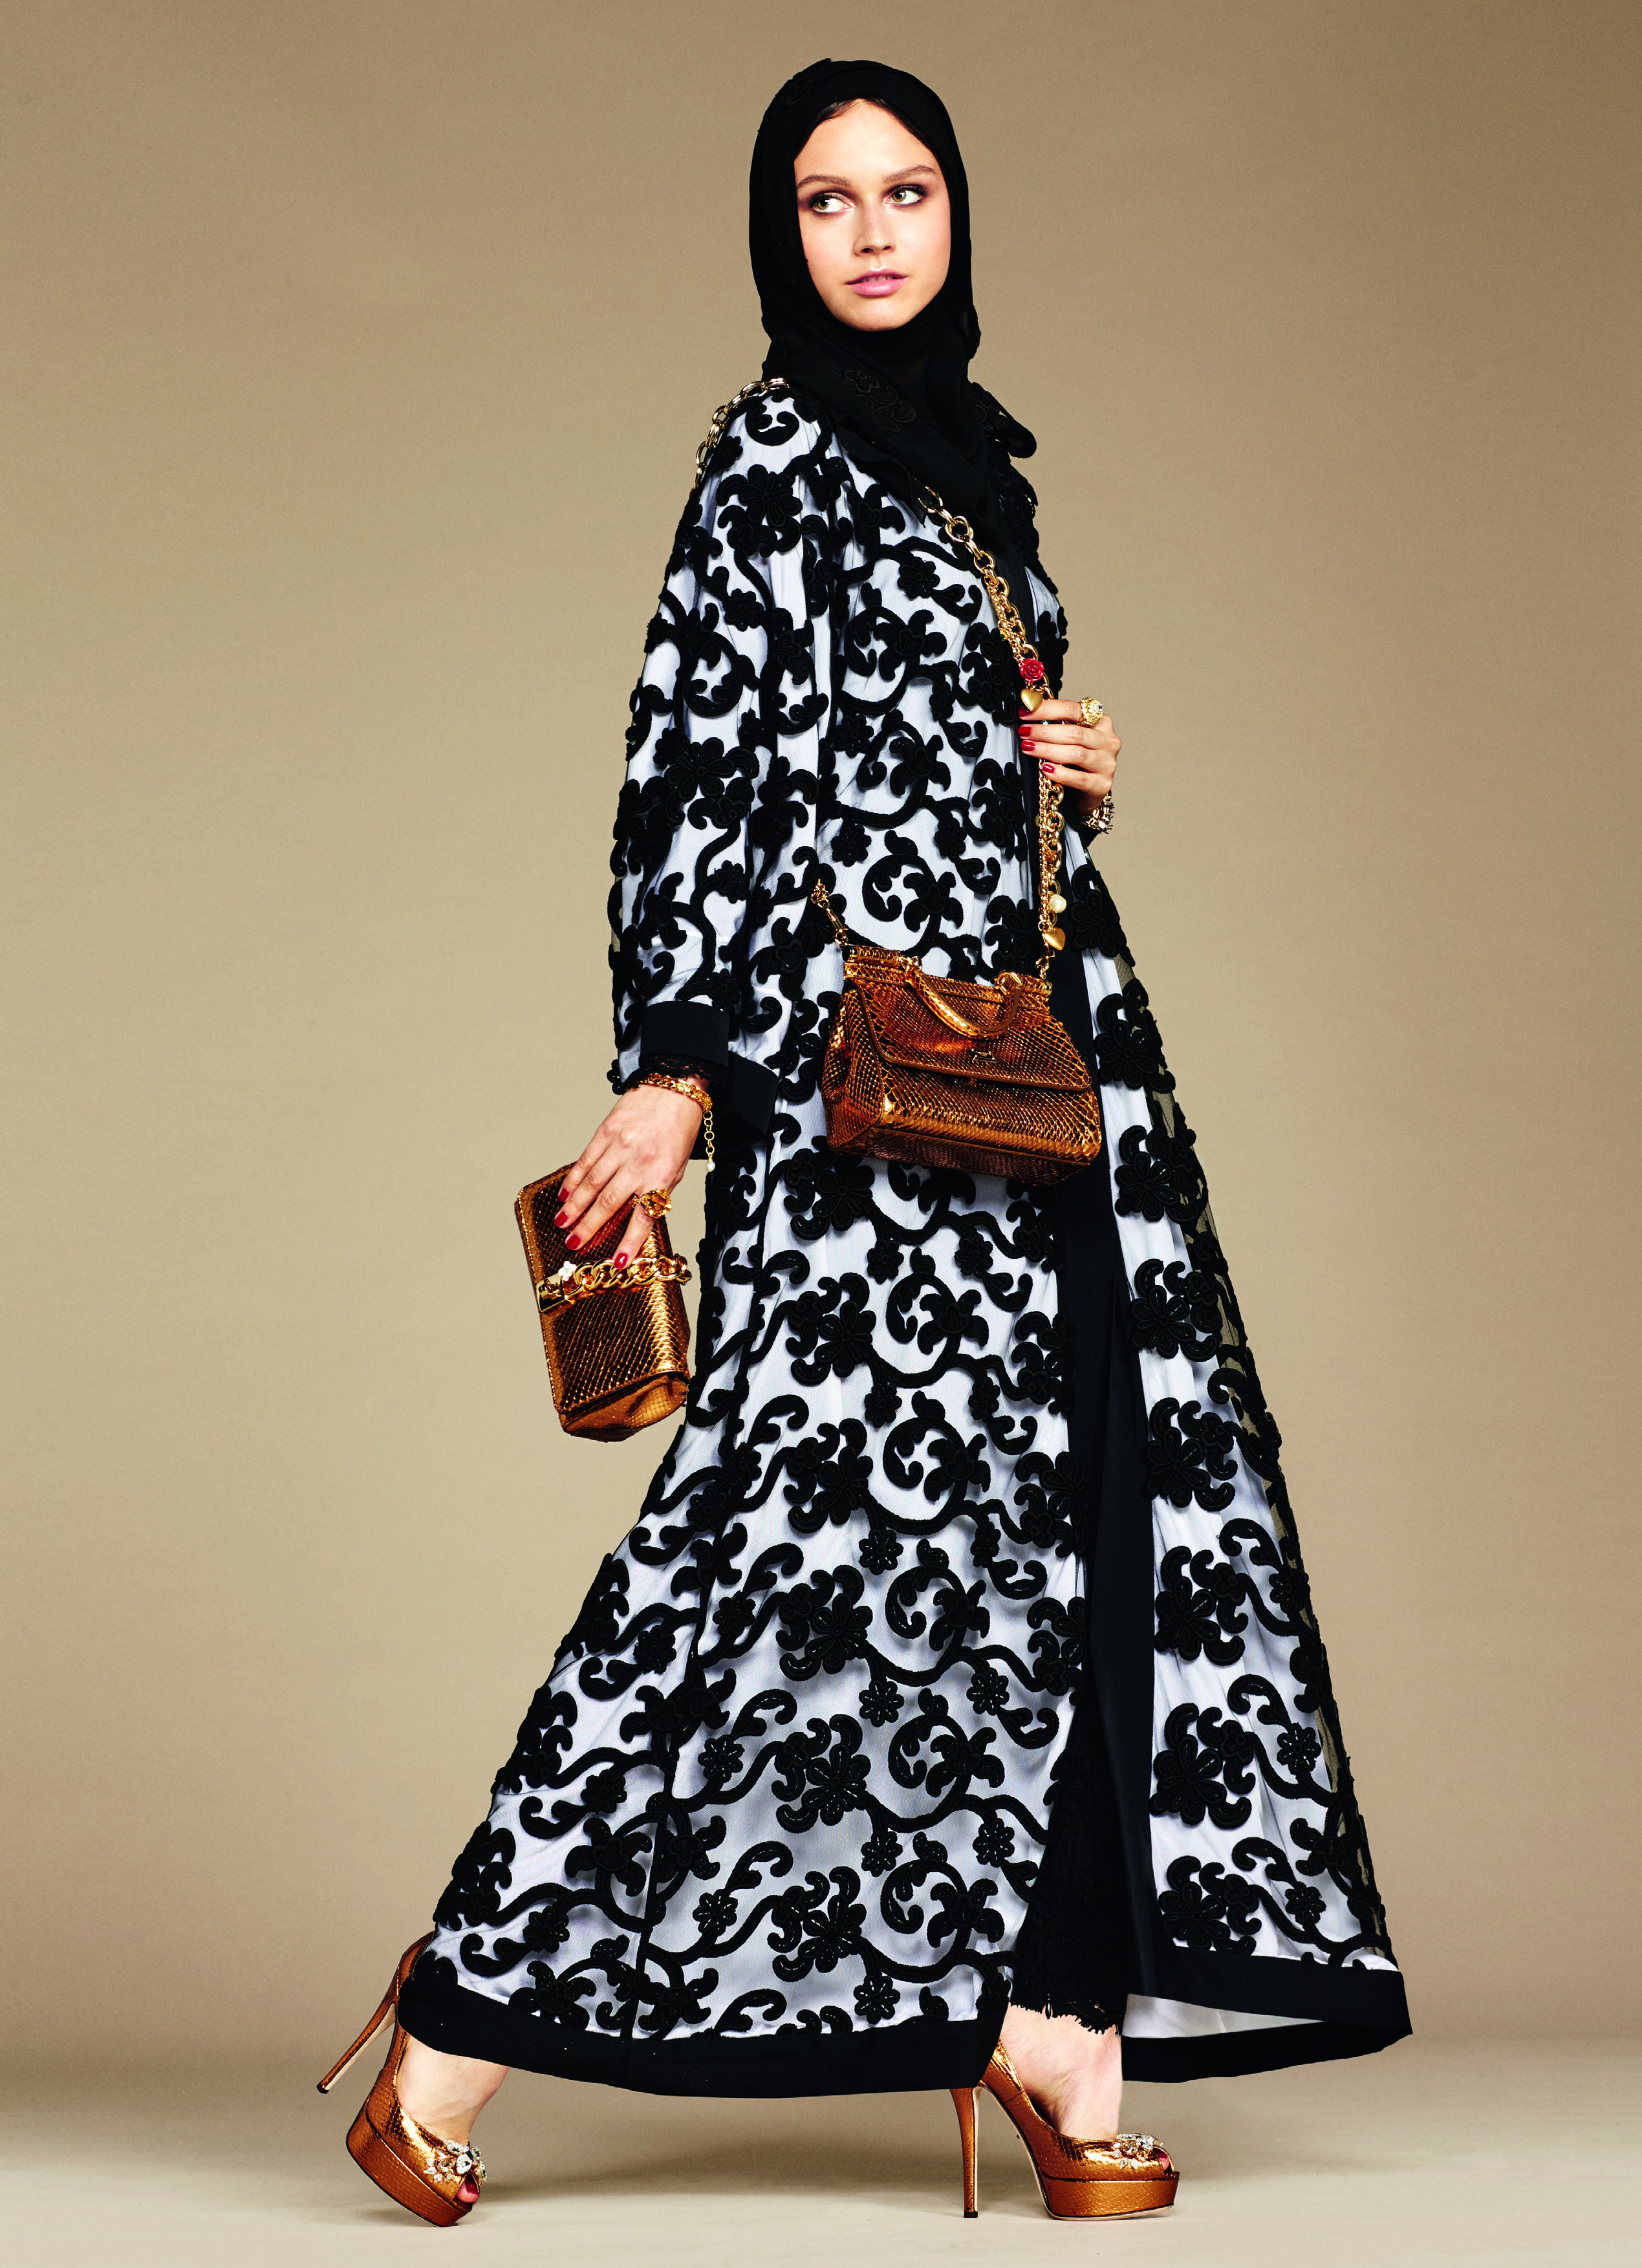 Dolce & Gabbana Reveals First Hijab and Abaya Collection | Time